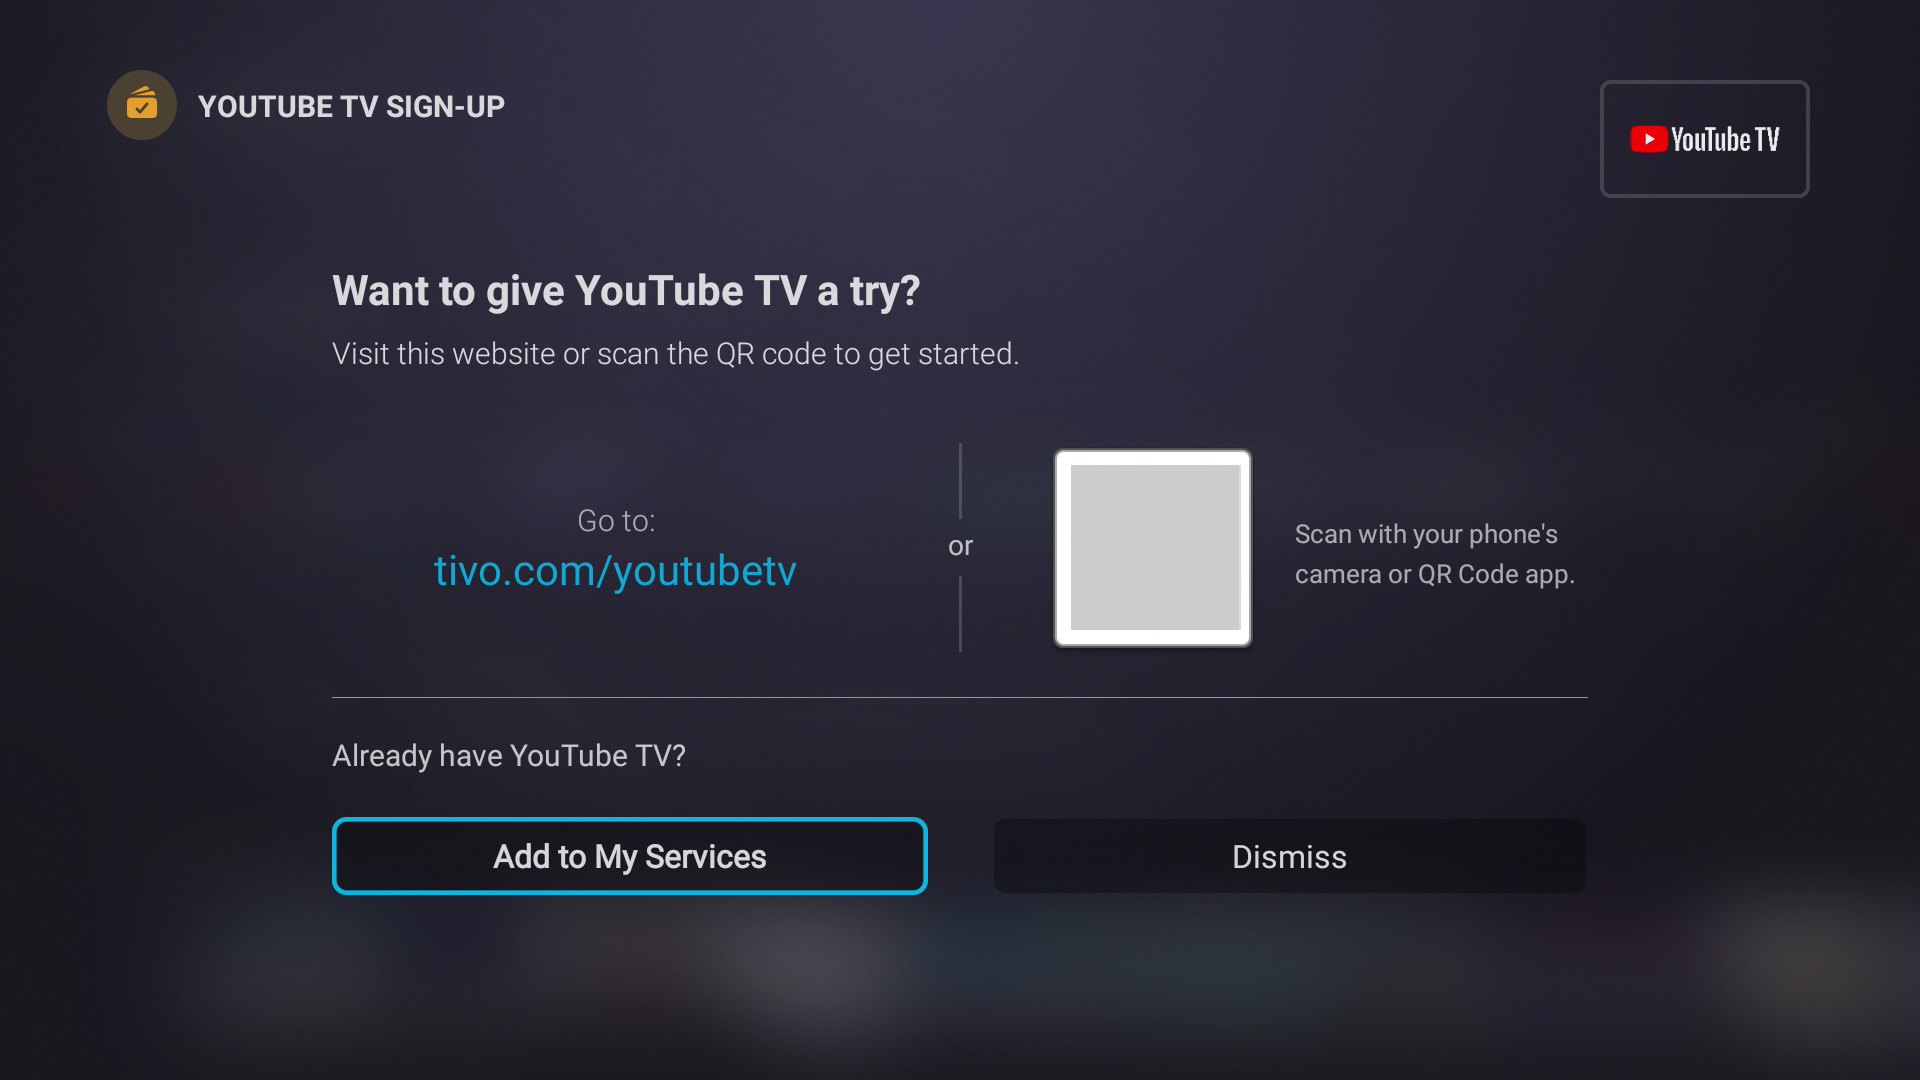 My Services YouTube TV message